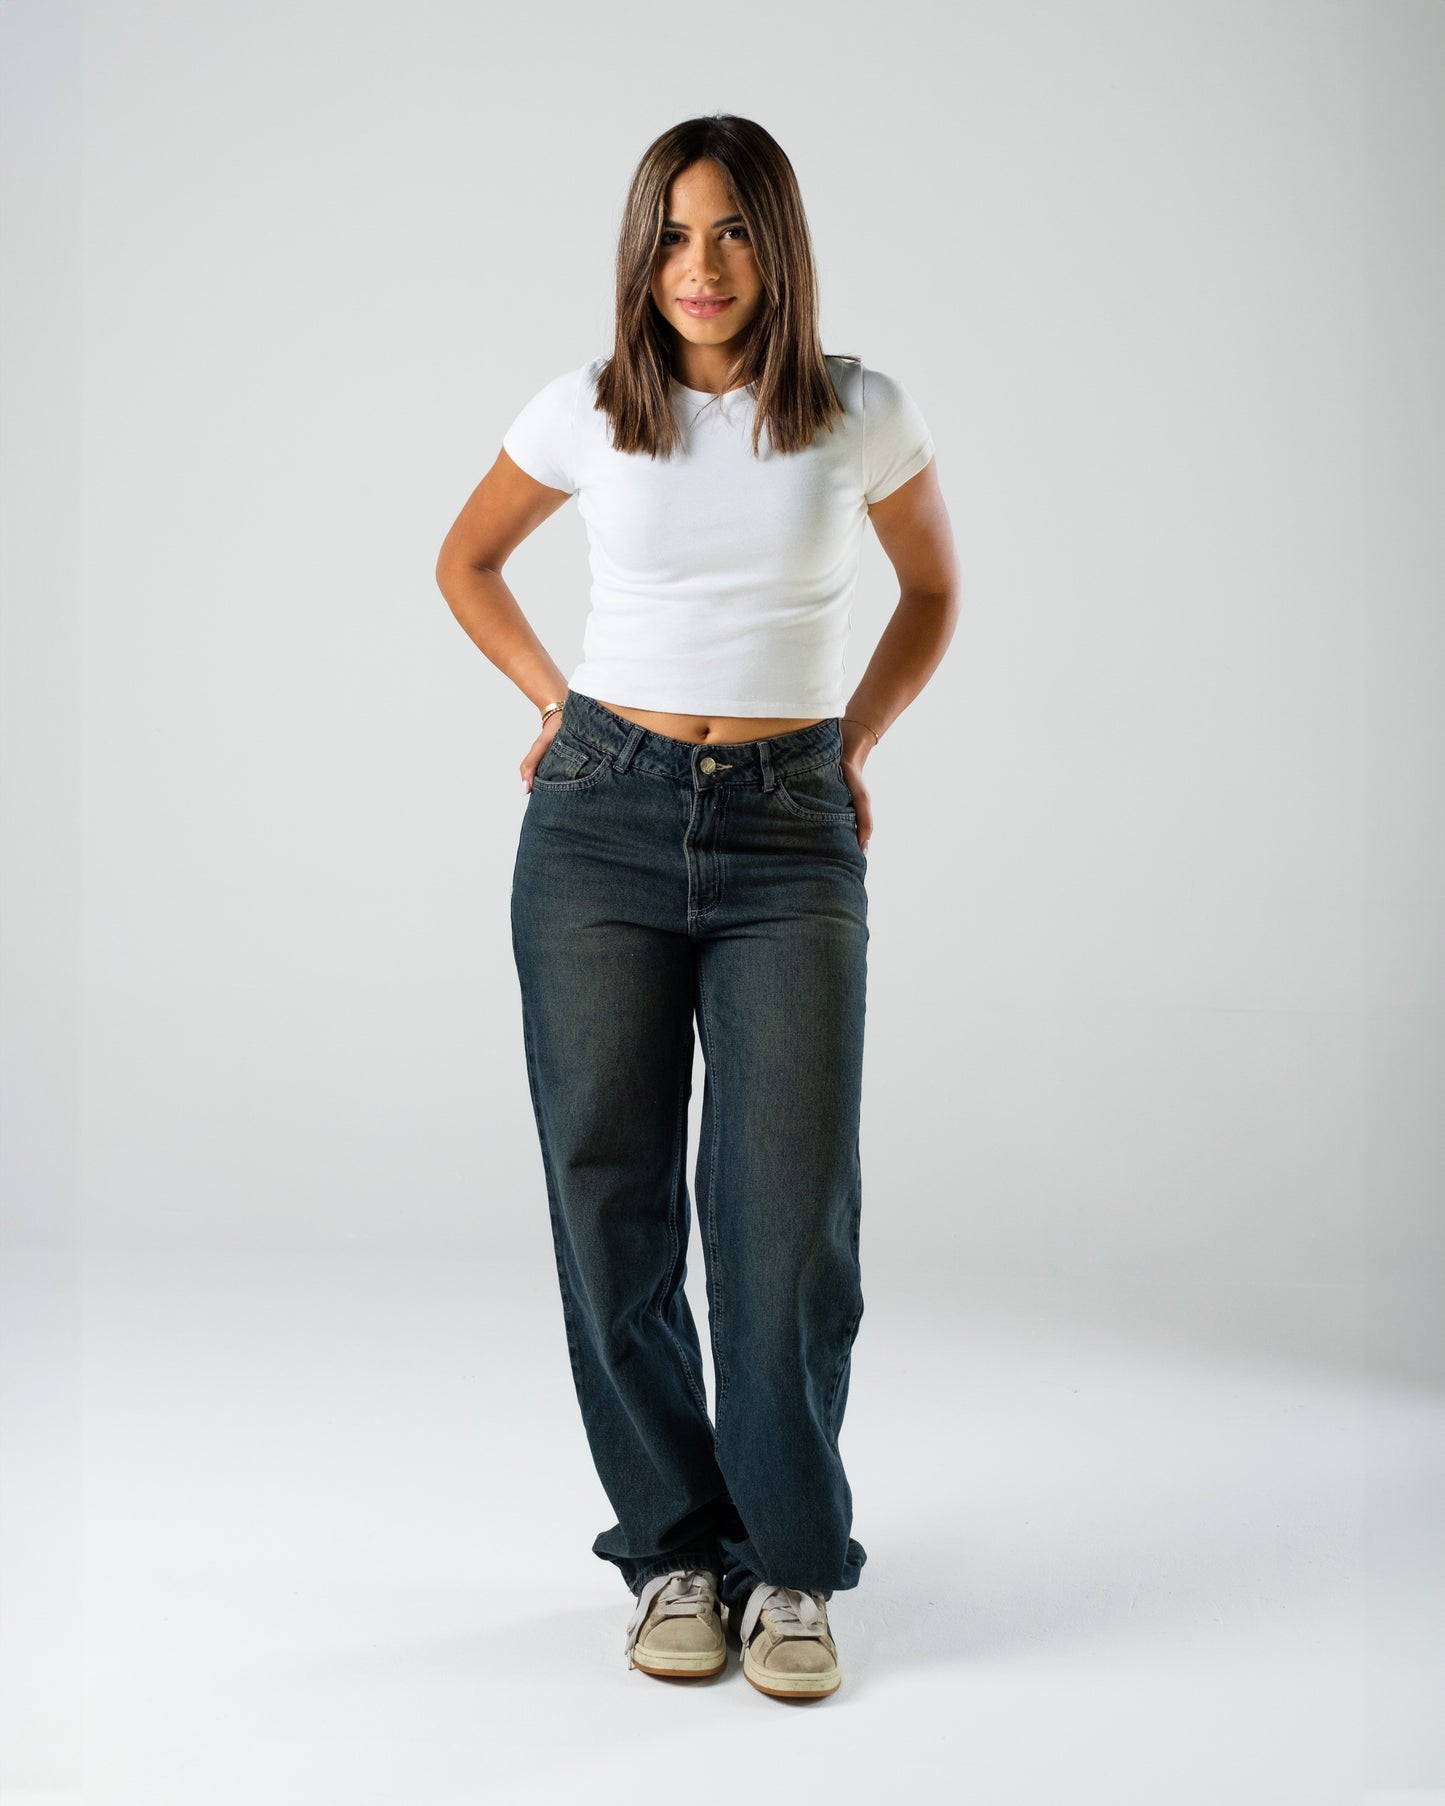 90's Fit Women's Jeans (Stone Washed Blue)